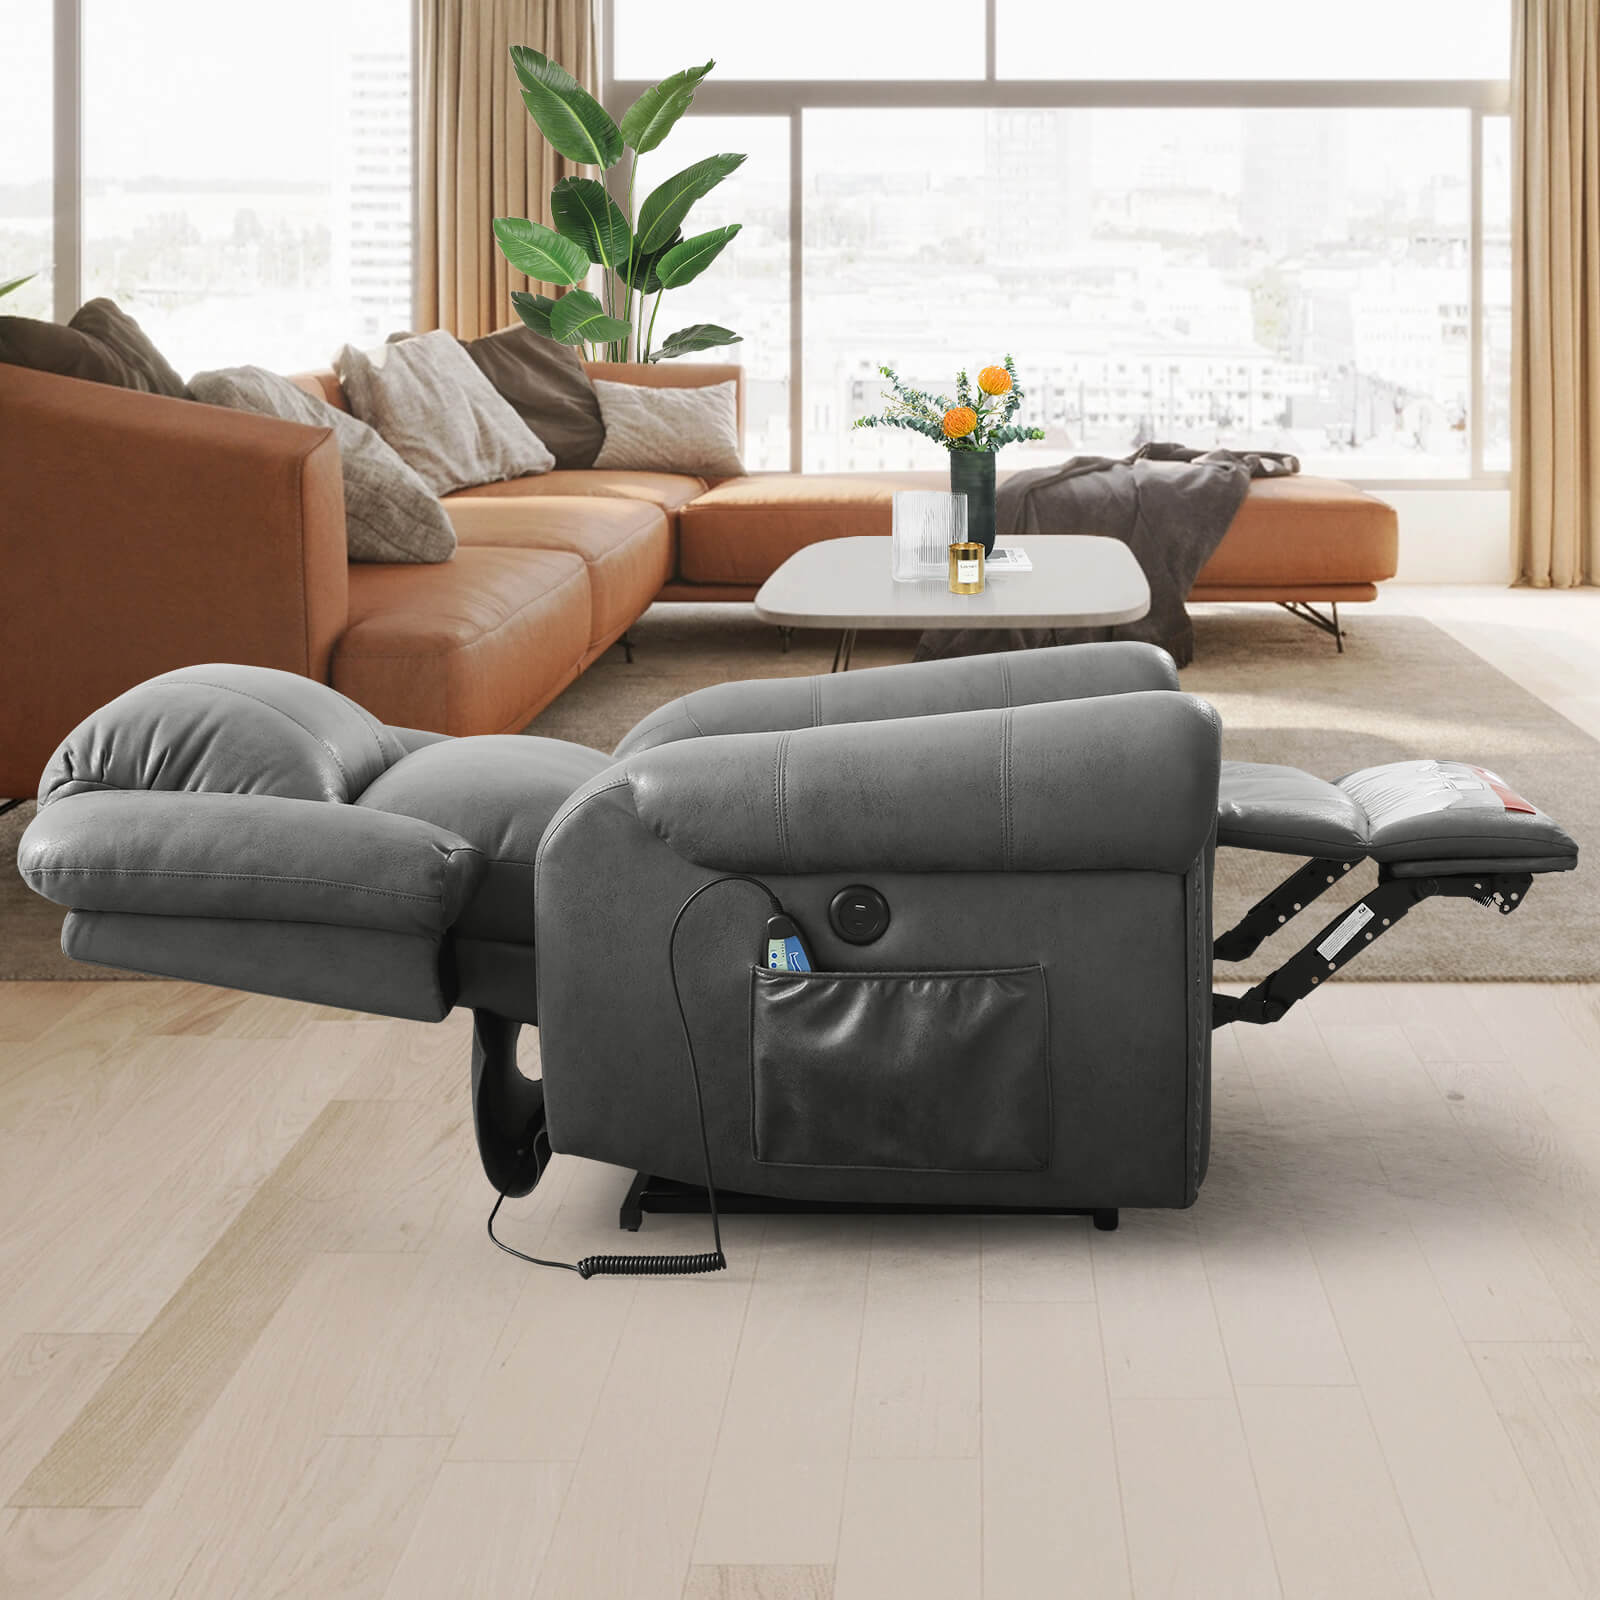 Large Infinite Position Lift Chair Recliner with Heat and Massage, Fabric